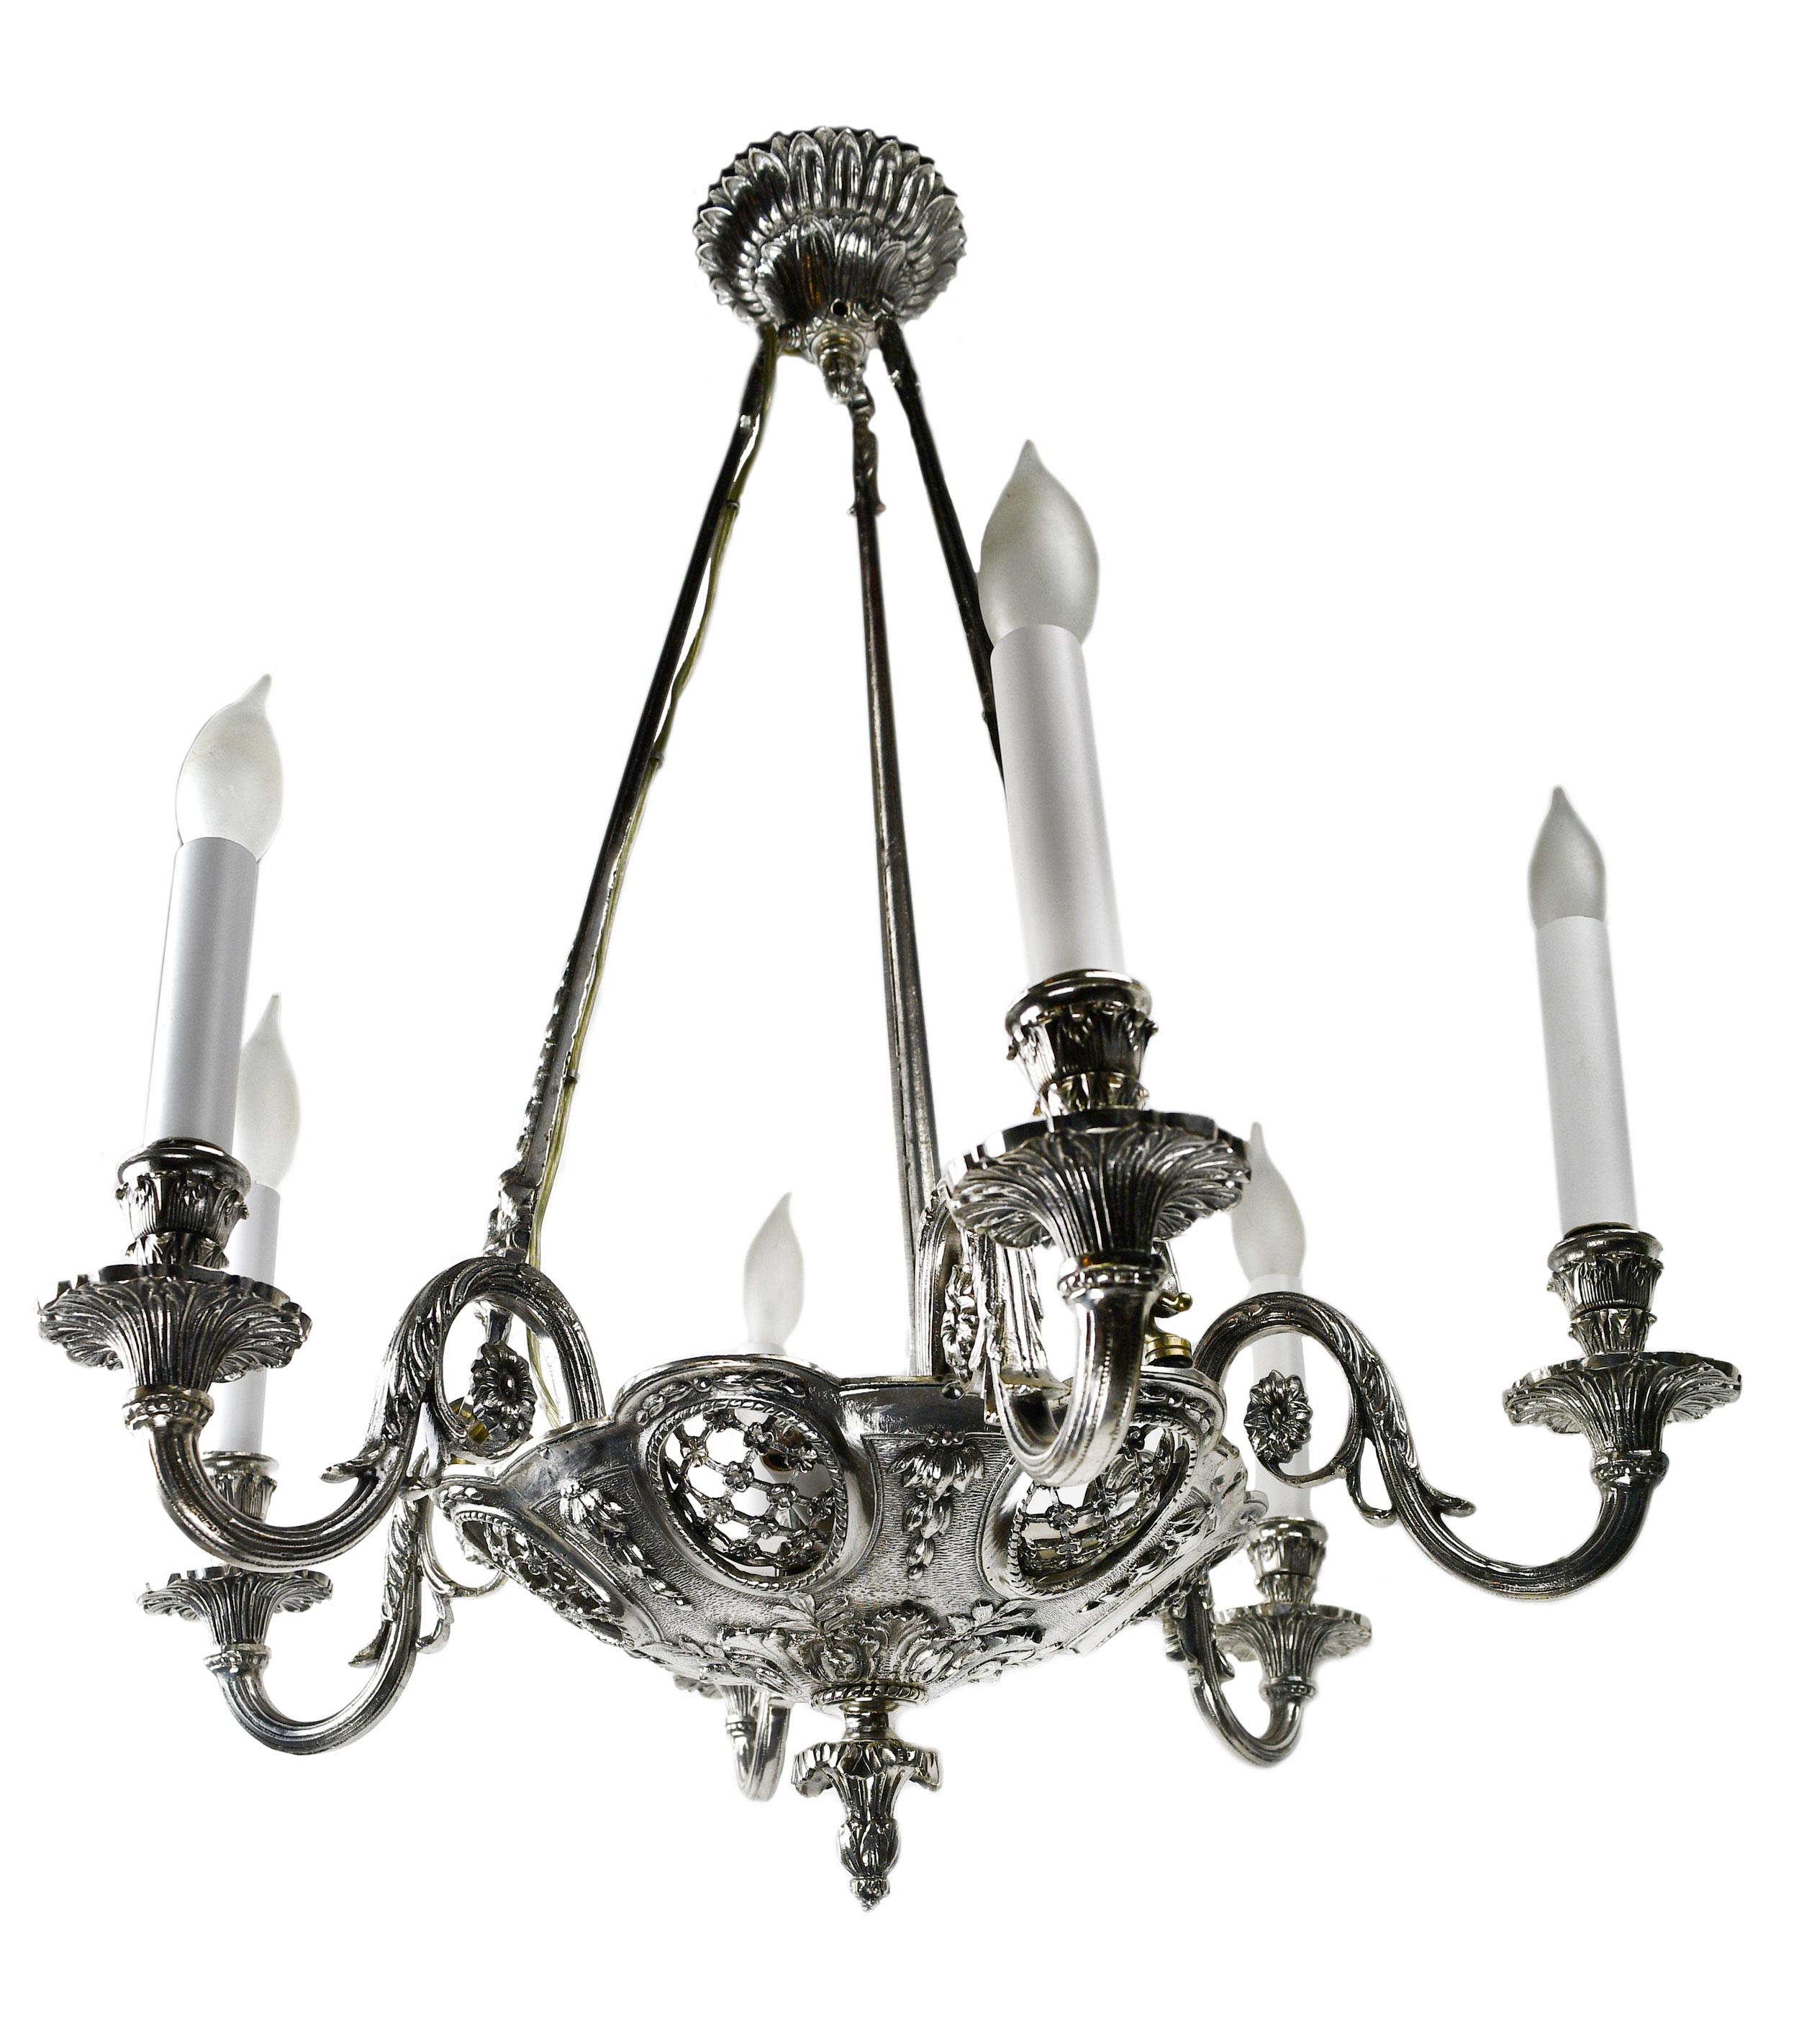 This stunning chandelier has lovely silver plating and features unique face designs and an intricately detailed floral pattern. The fine craftsmanship found through within the silver plating of this chandelier is truly eye-catching! 3 candelabra